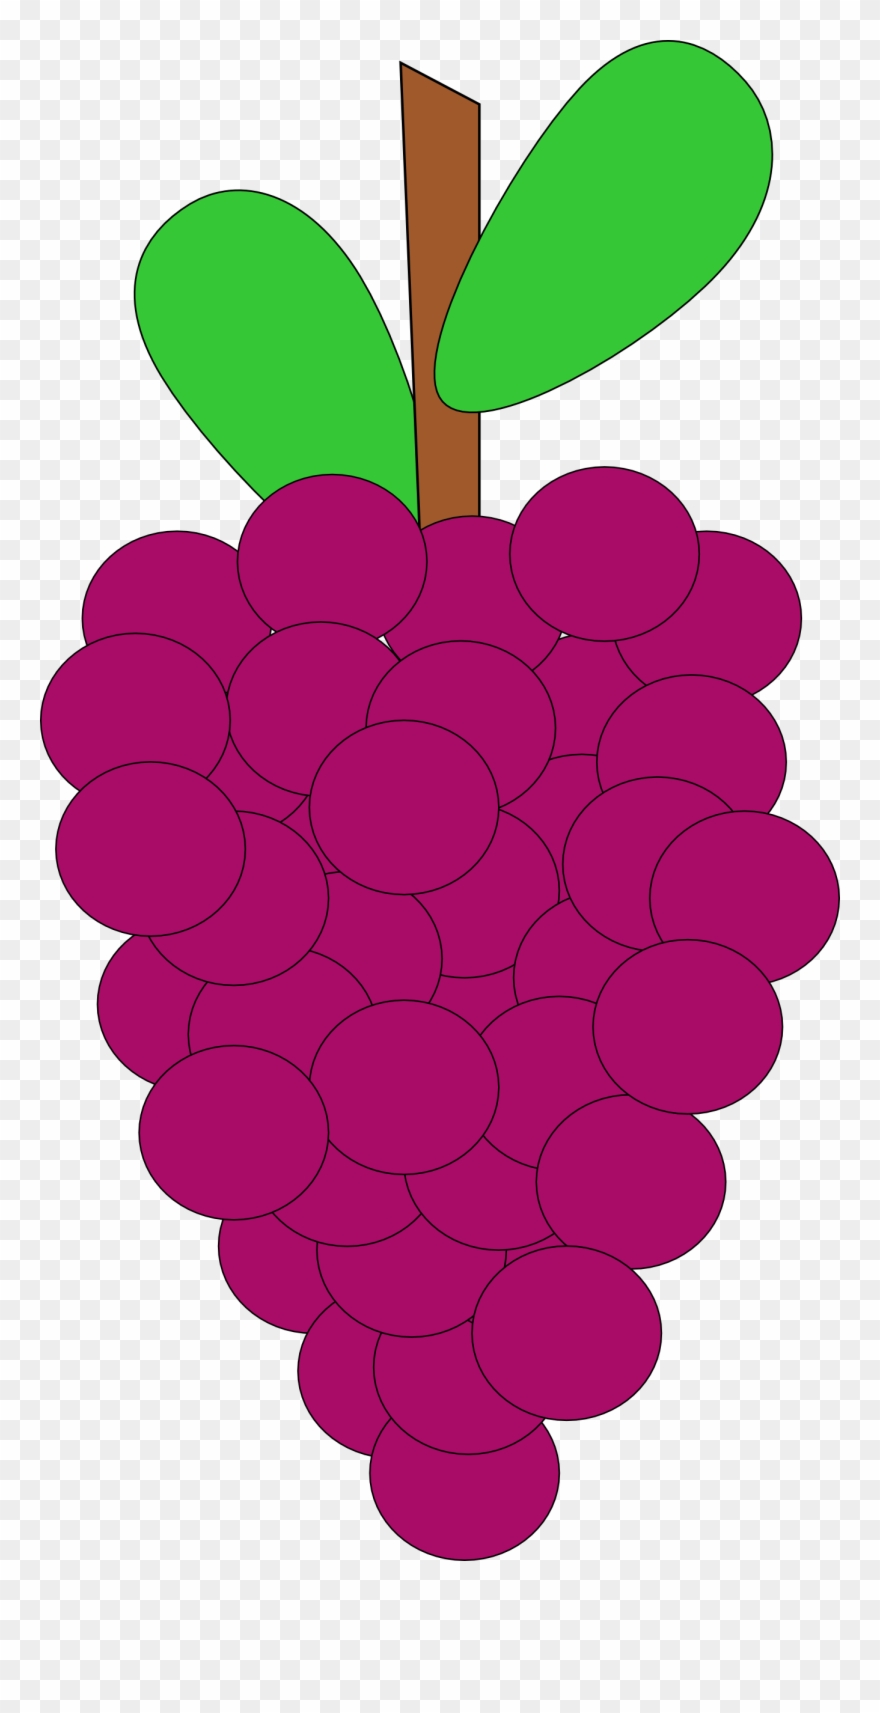 grapes clipart animated